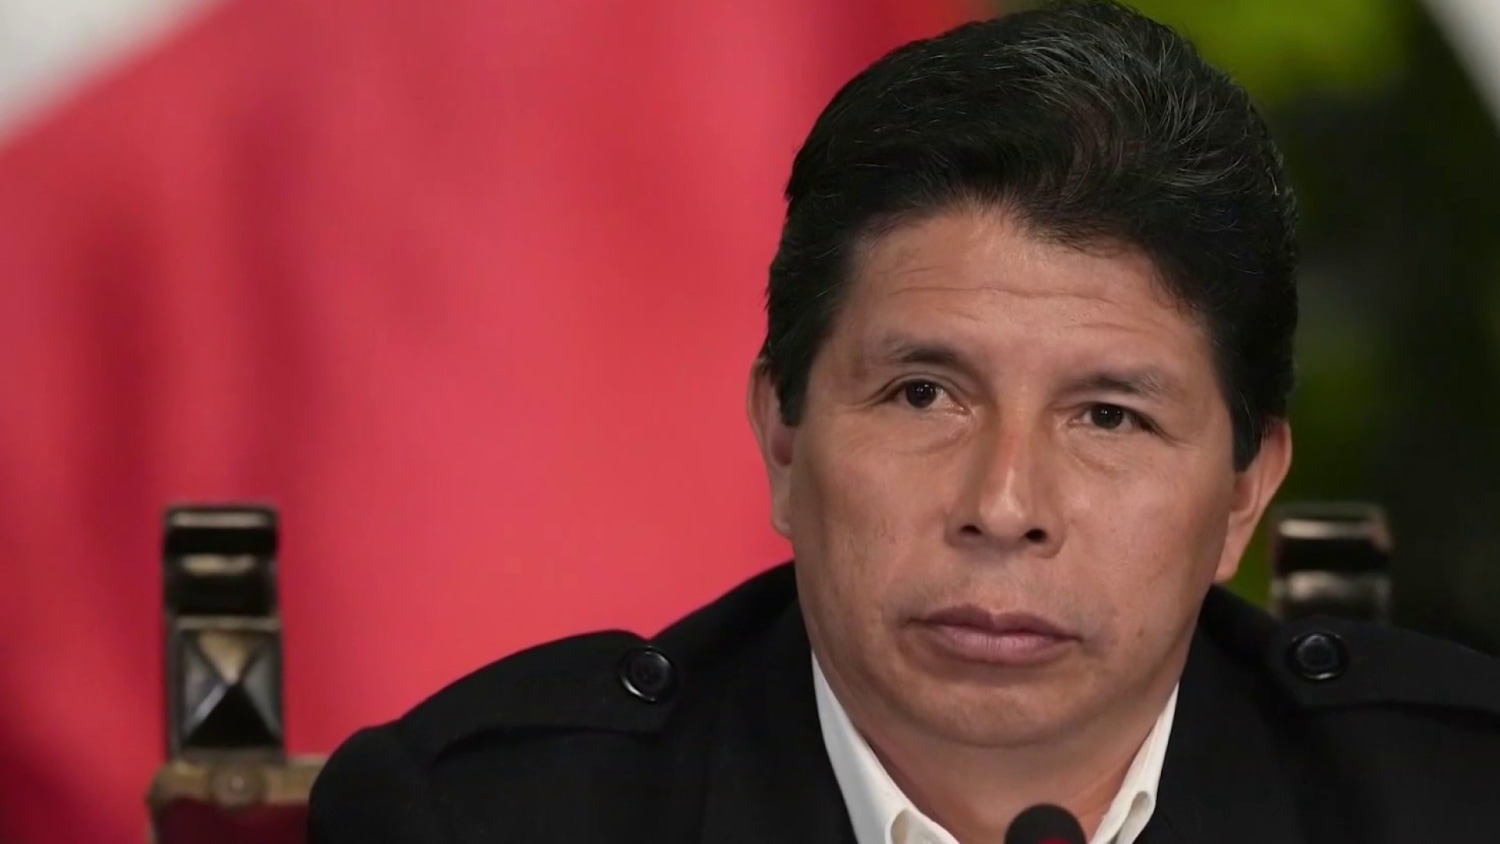 President of Peru Pedro Castillo Arrested After Trying to Dissolve Congress